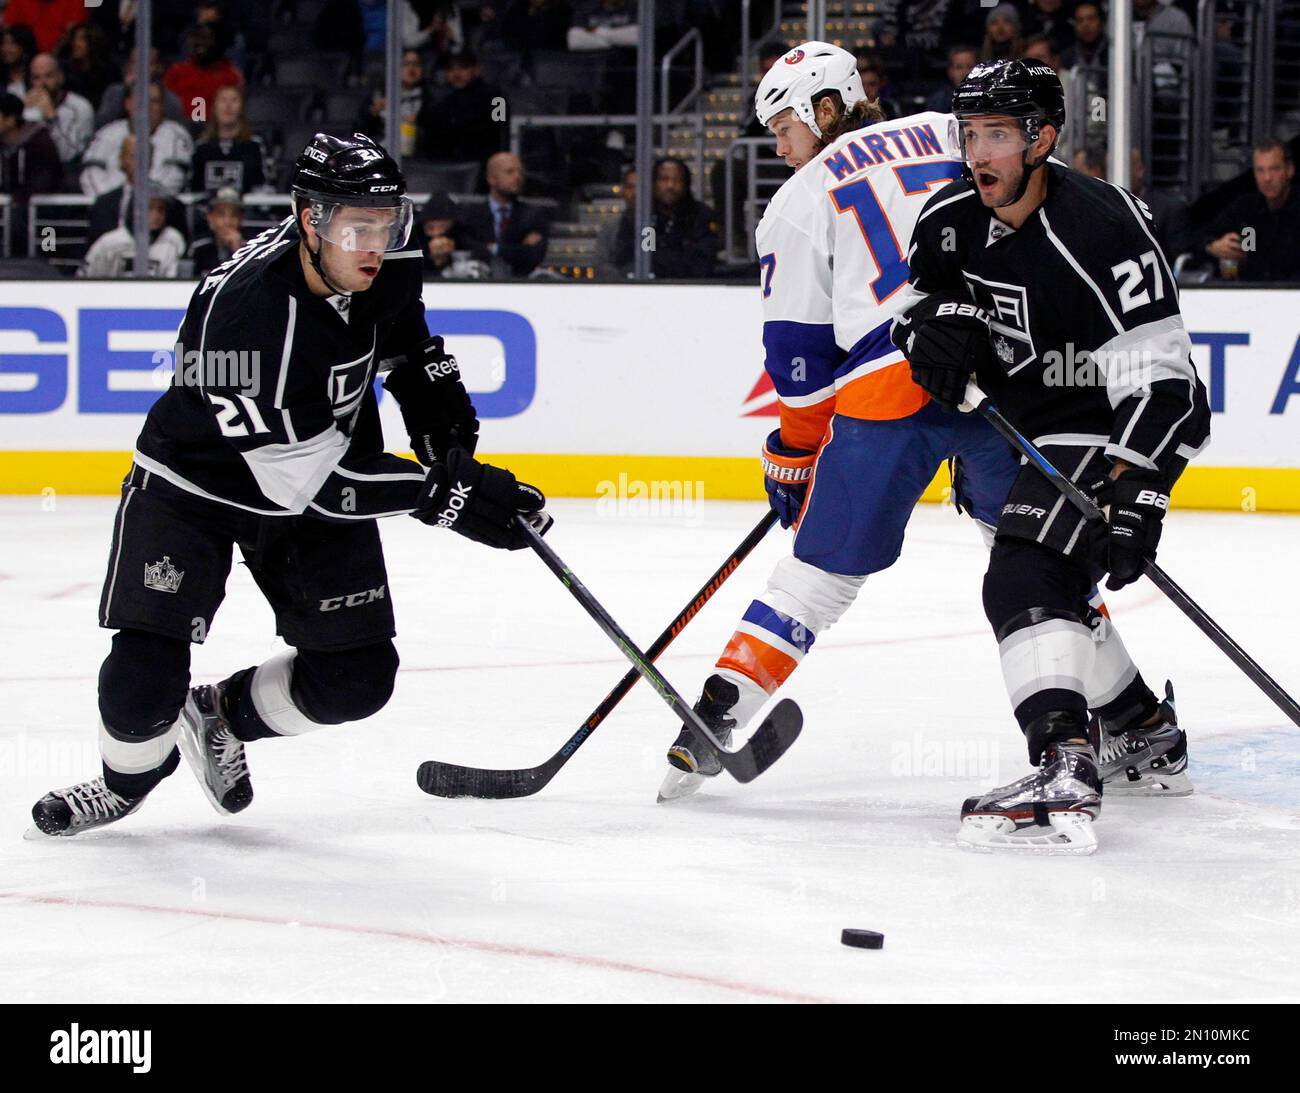 Los Angeles Kings center Nick Shore (21) and defenseman Alec Martinez (27)  clear the puck away from New York Islanders left wing Matt Martin (17)  during the first period of an NHL